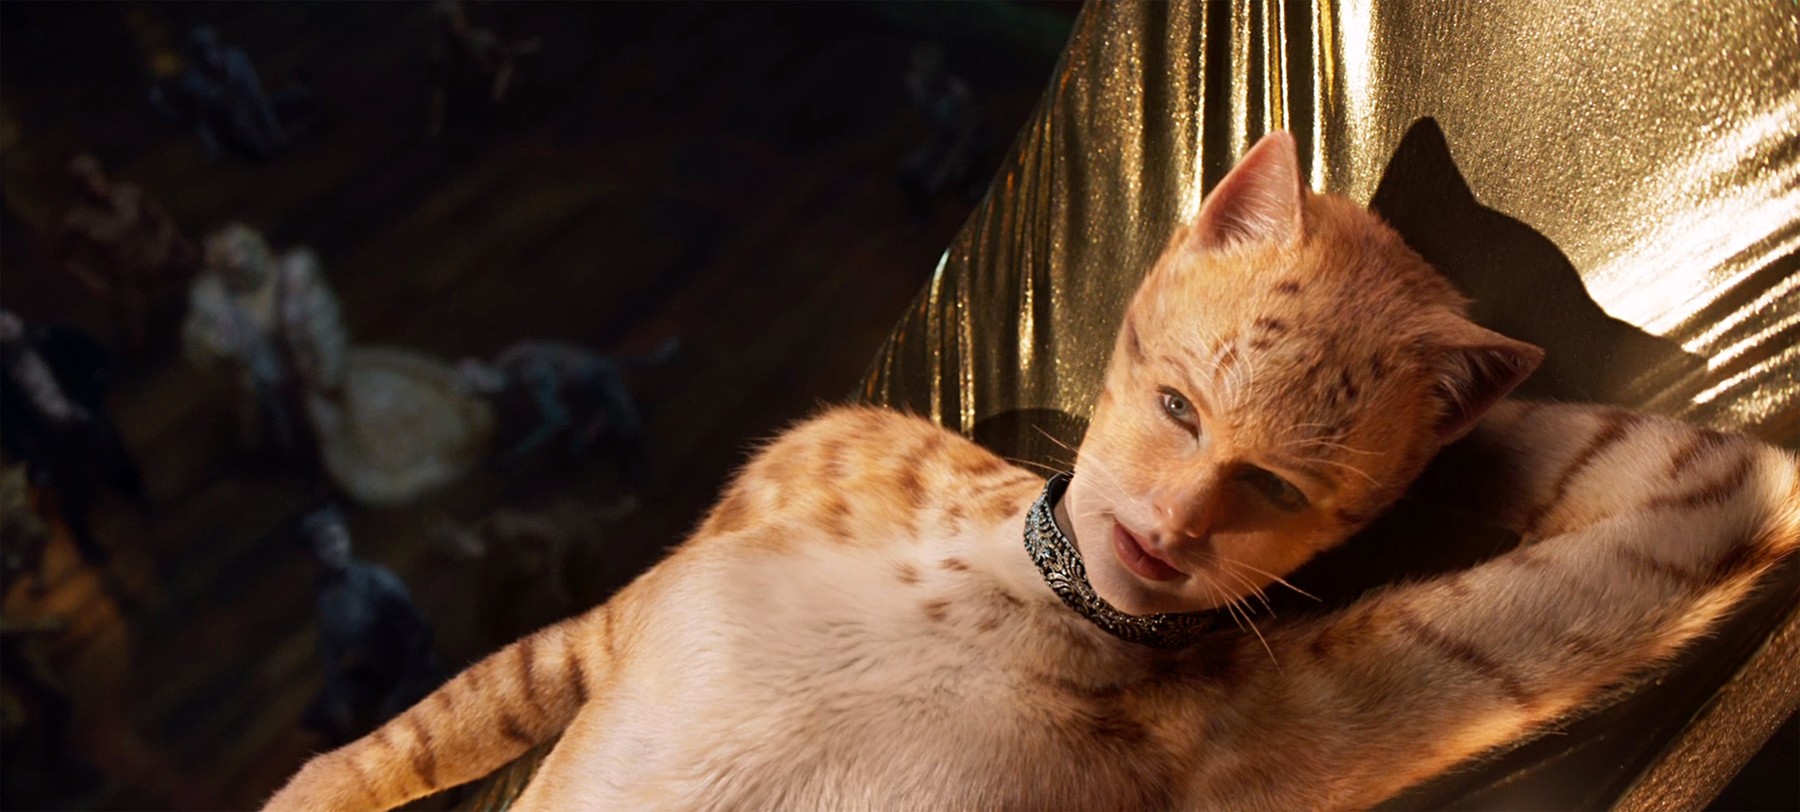 USA. Taylor Swift  in a scene from the ©Universal Pictures new movie: Cats (2019). 
Plot: A tribe of cats called the Jellicles must decide yearly which one will ascend to the Heaviside Layer and come back to a new Jellicle life., Image: 486679040, License: Rights-managed, Restrictions: Supplied by Landmark Media. Editorial Only. Landmark Media is not the copyright owner of these Film or TV stills but provides a service only for recognised Media outlets., Model Release: no, Credit line: Supplied by LMK / Landmark / Profimedia